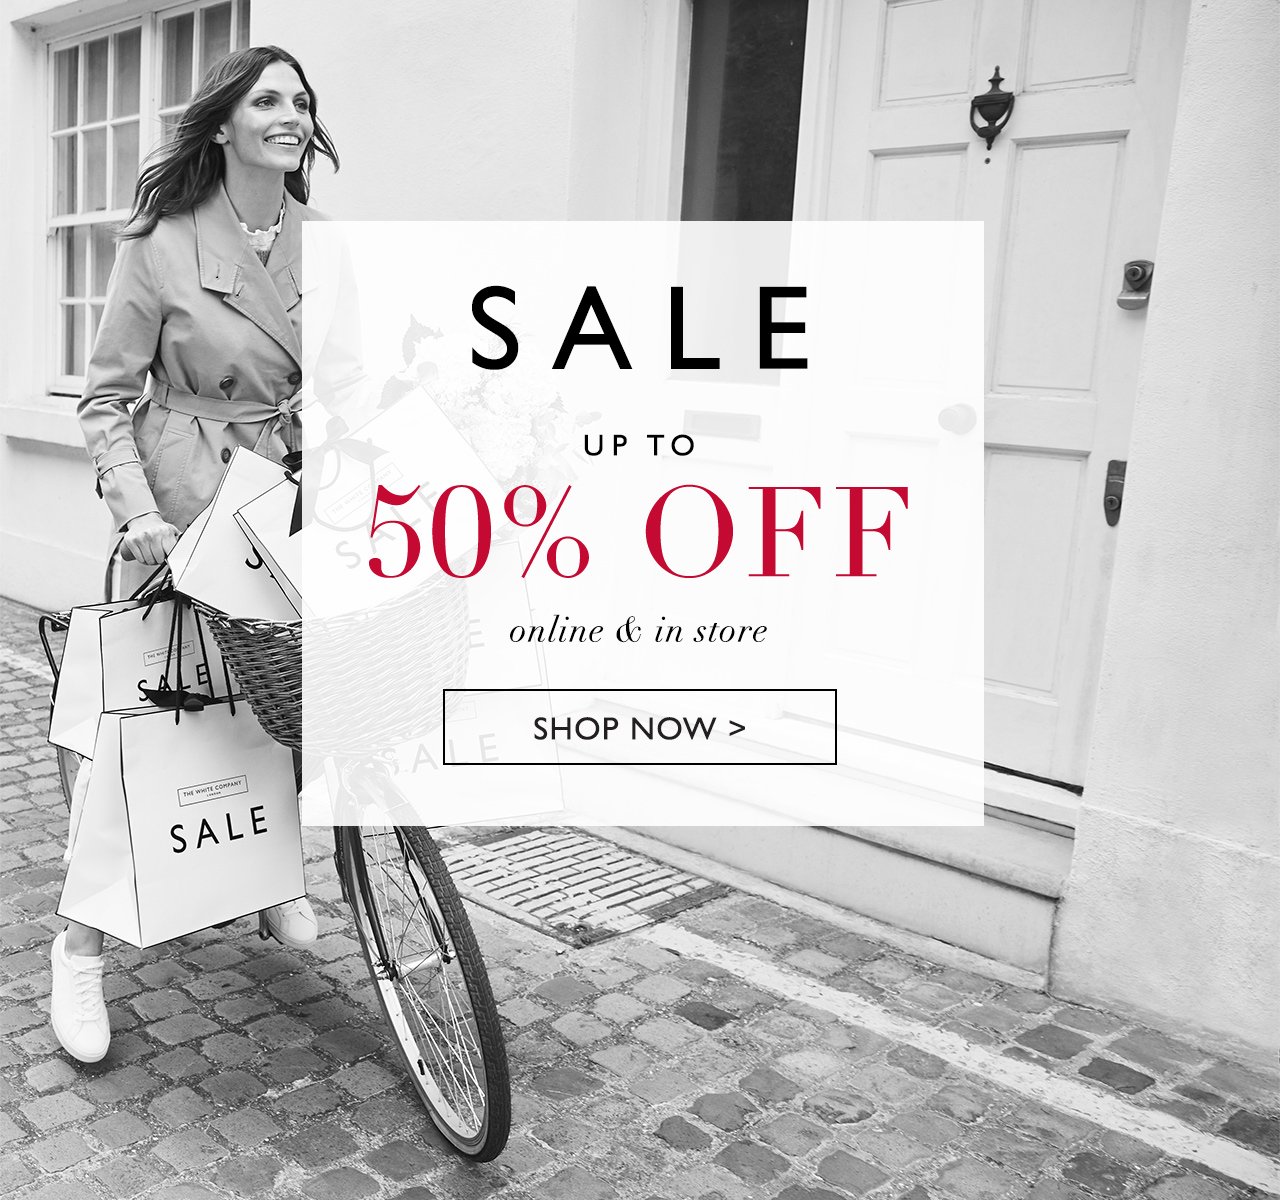 SALE UP TO 50% OFF | SHOP NOW